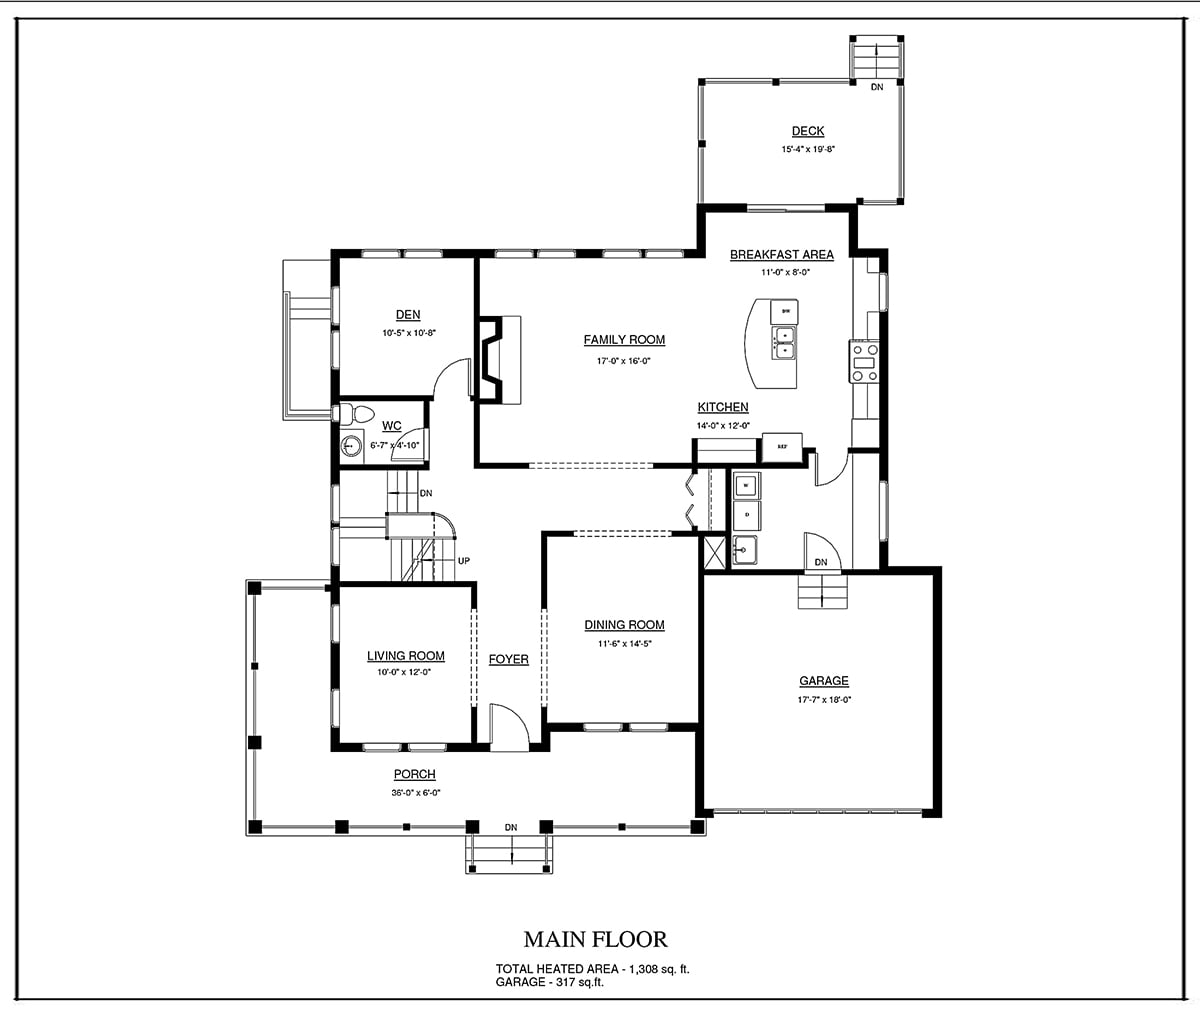 Second Floor Plan With Localization Of